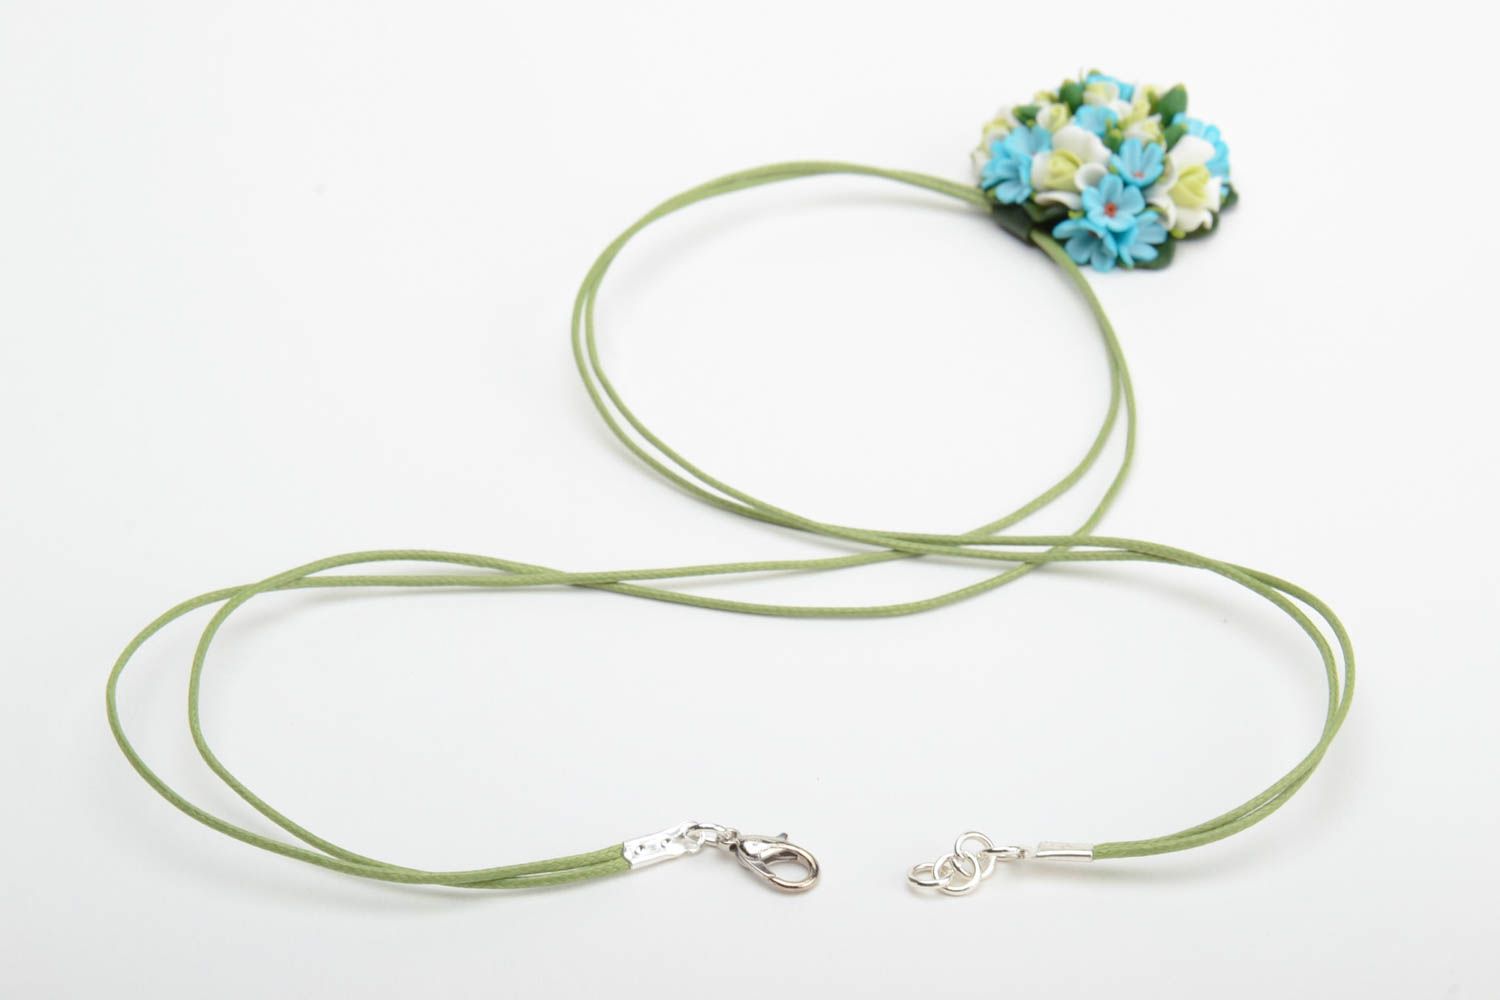 Handmade small round pendant necklace with blue polymer clay flowers on green cord photo 4